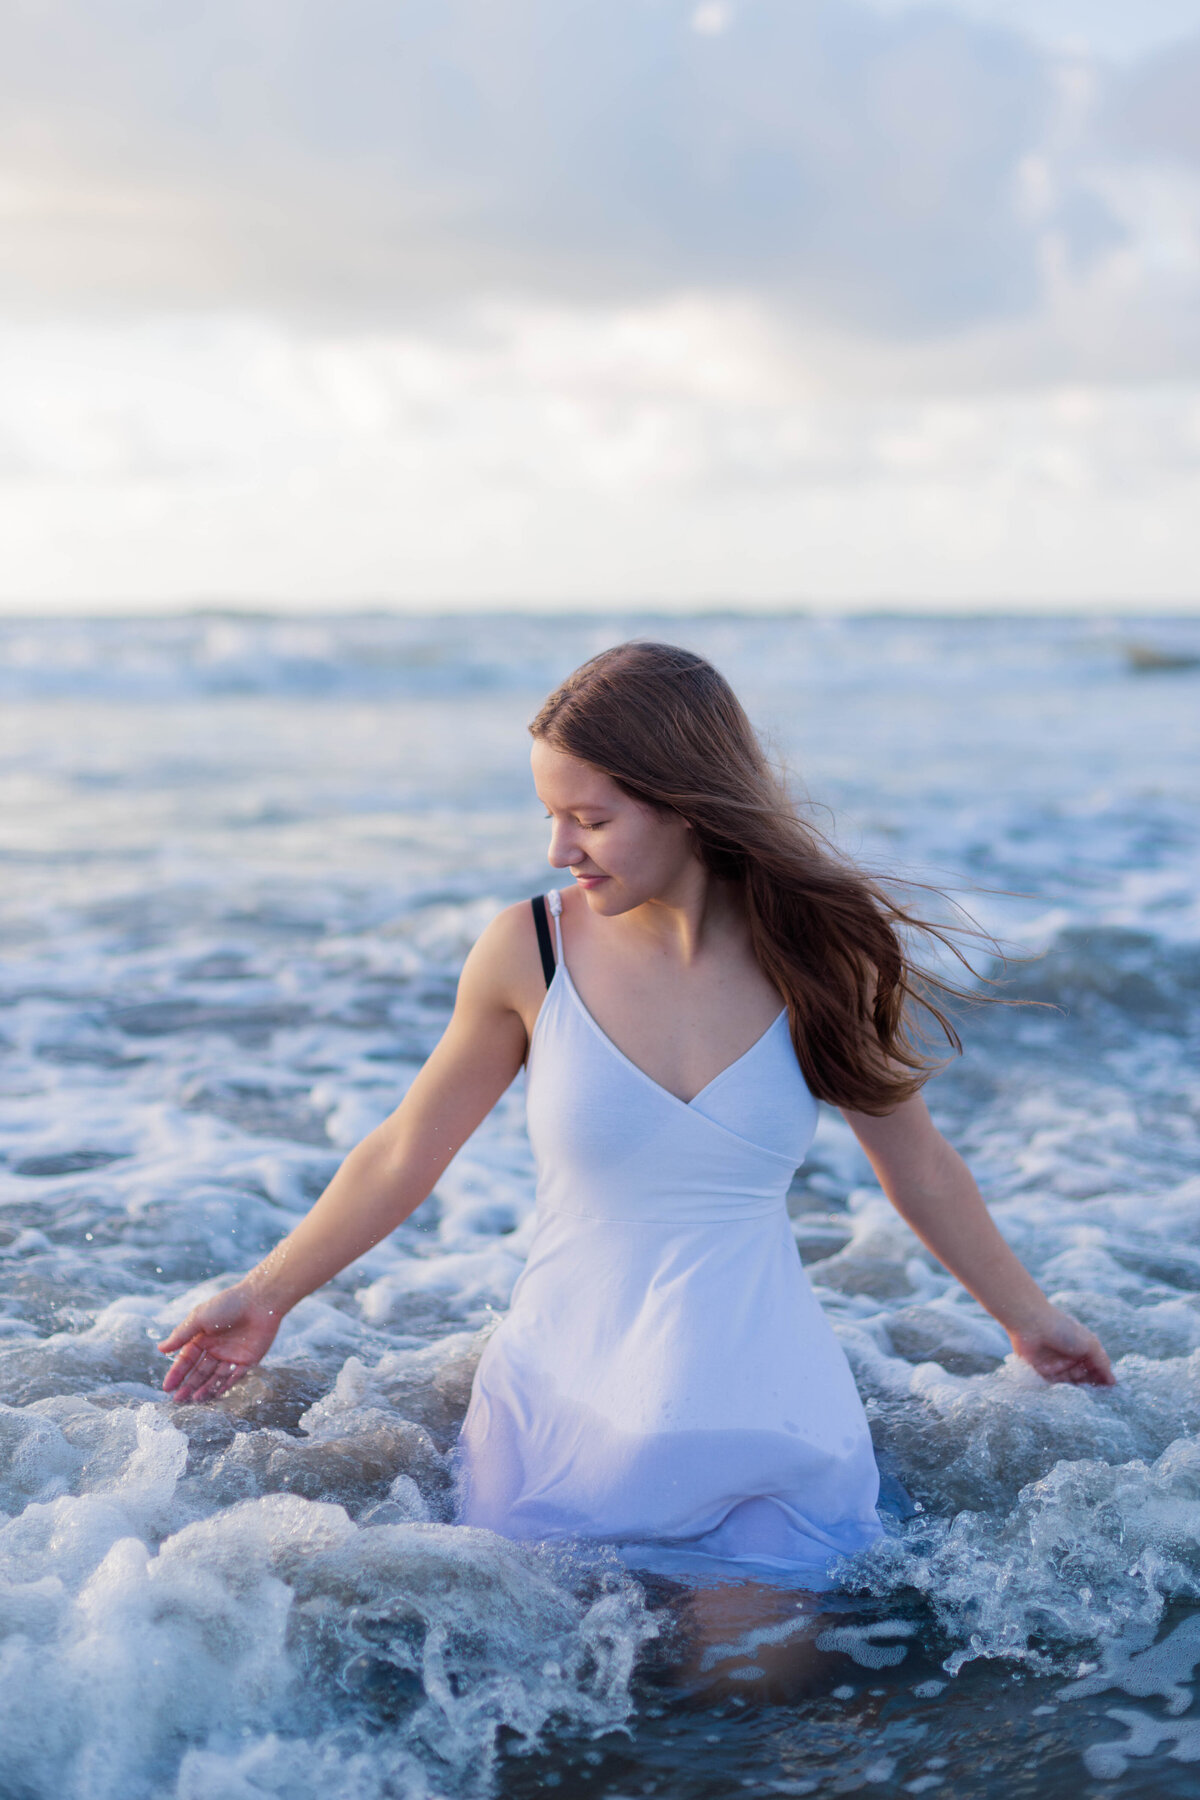 Girl kneels in the waves on Galveston Beach wearing a white dress